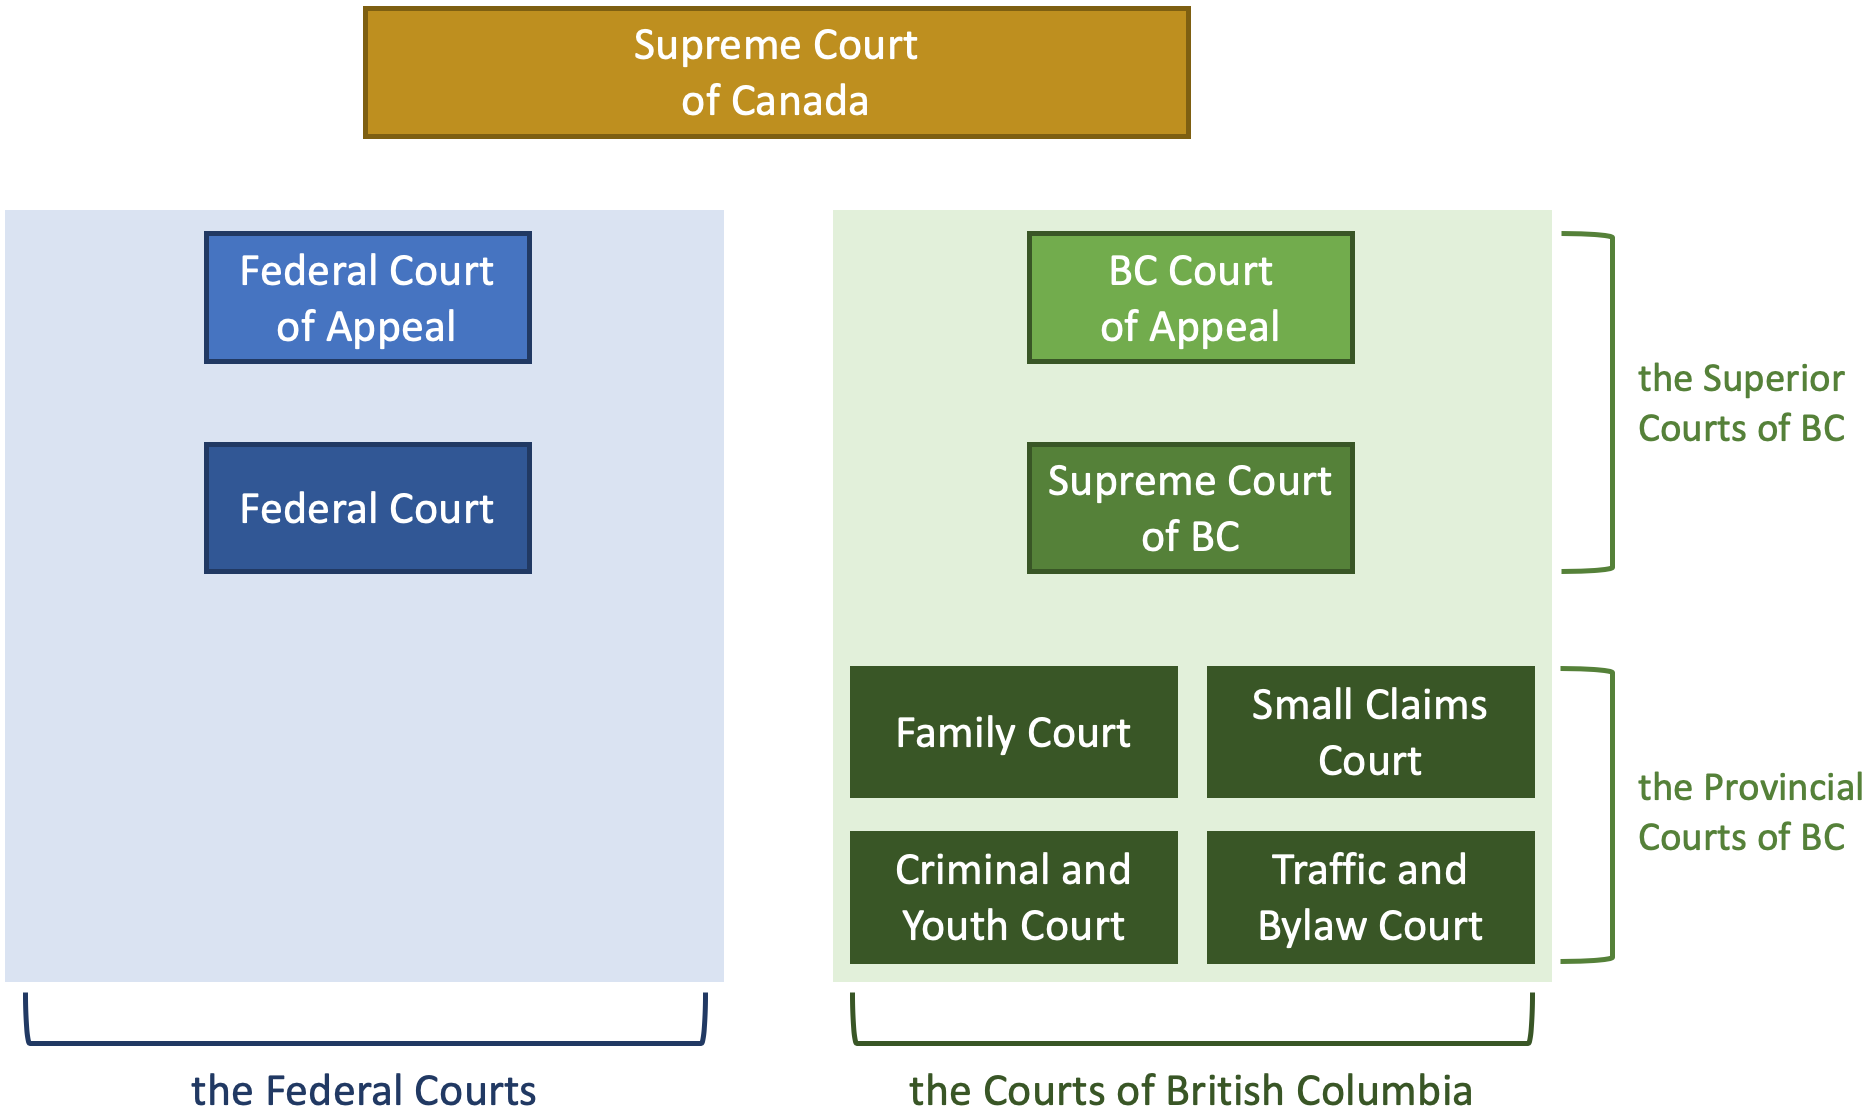 Structure of the federal and British Columbia courts